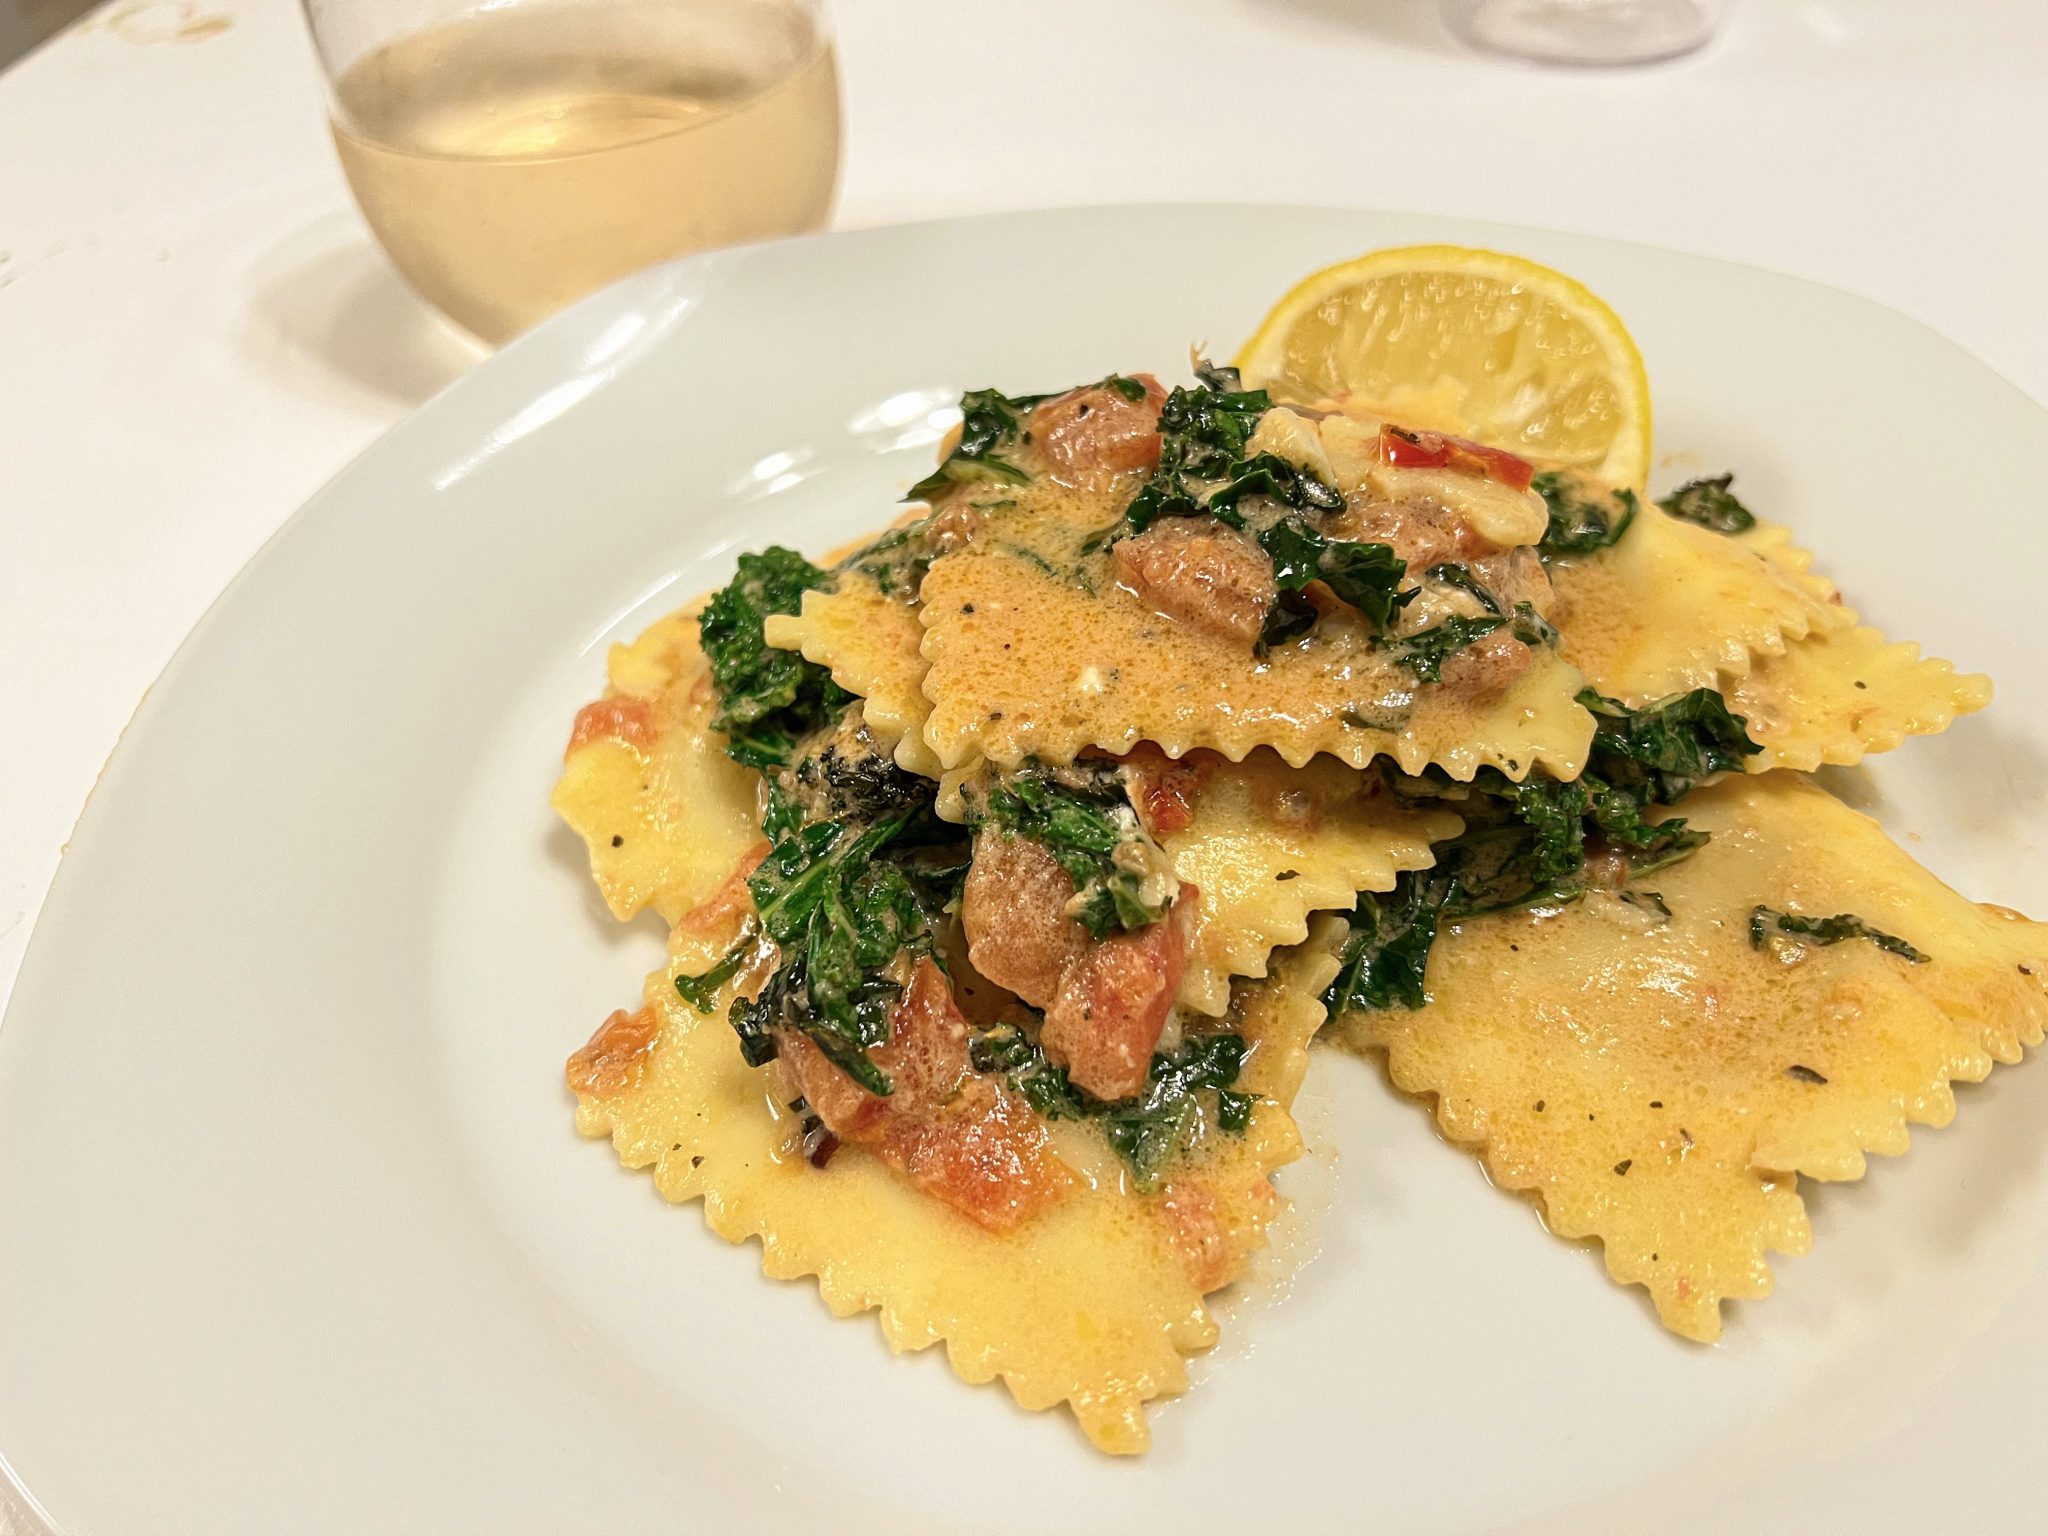 Ravioli with kale and tomatoes